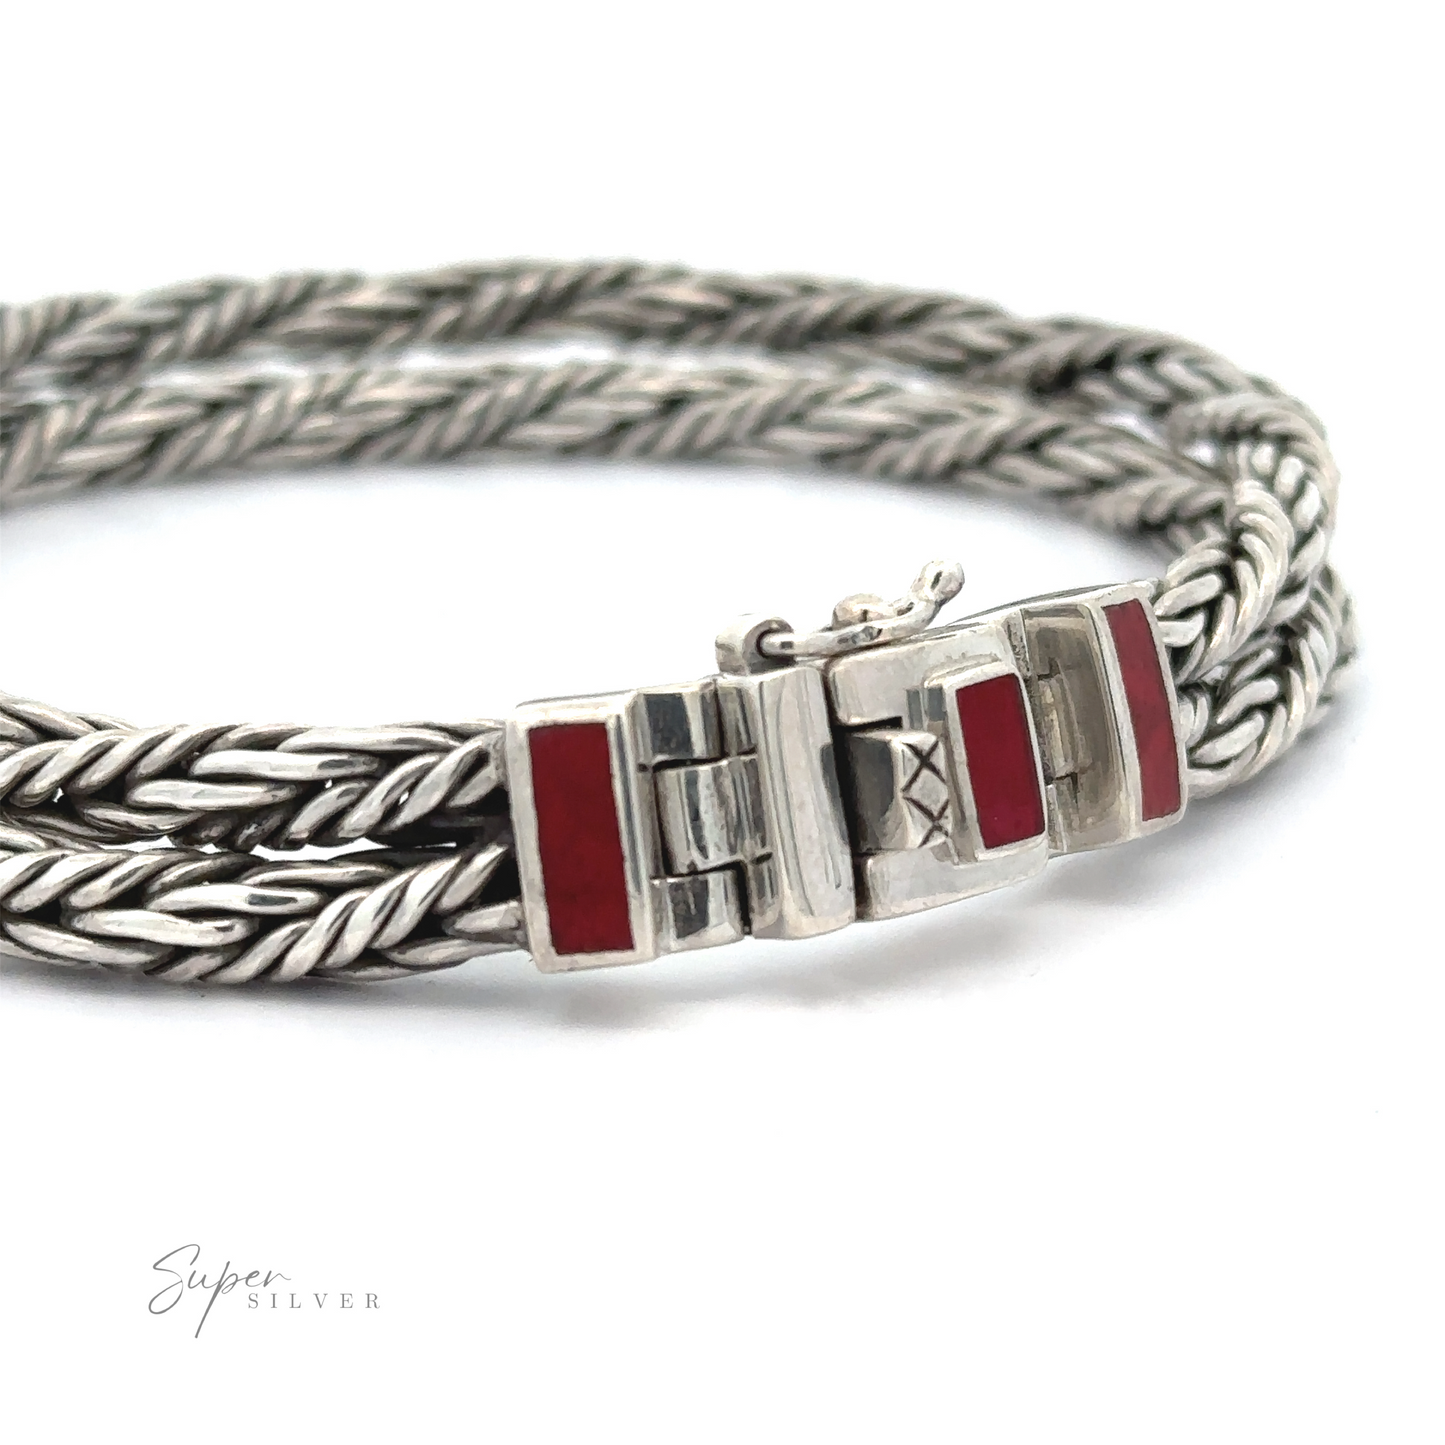 A unique Double Twisted Braided Rope Bracelet in sterling silver with a rectangular clasp featuring red accents, positioned on a white surface.